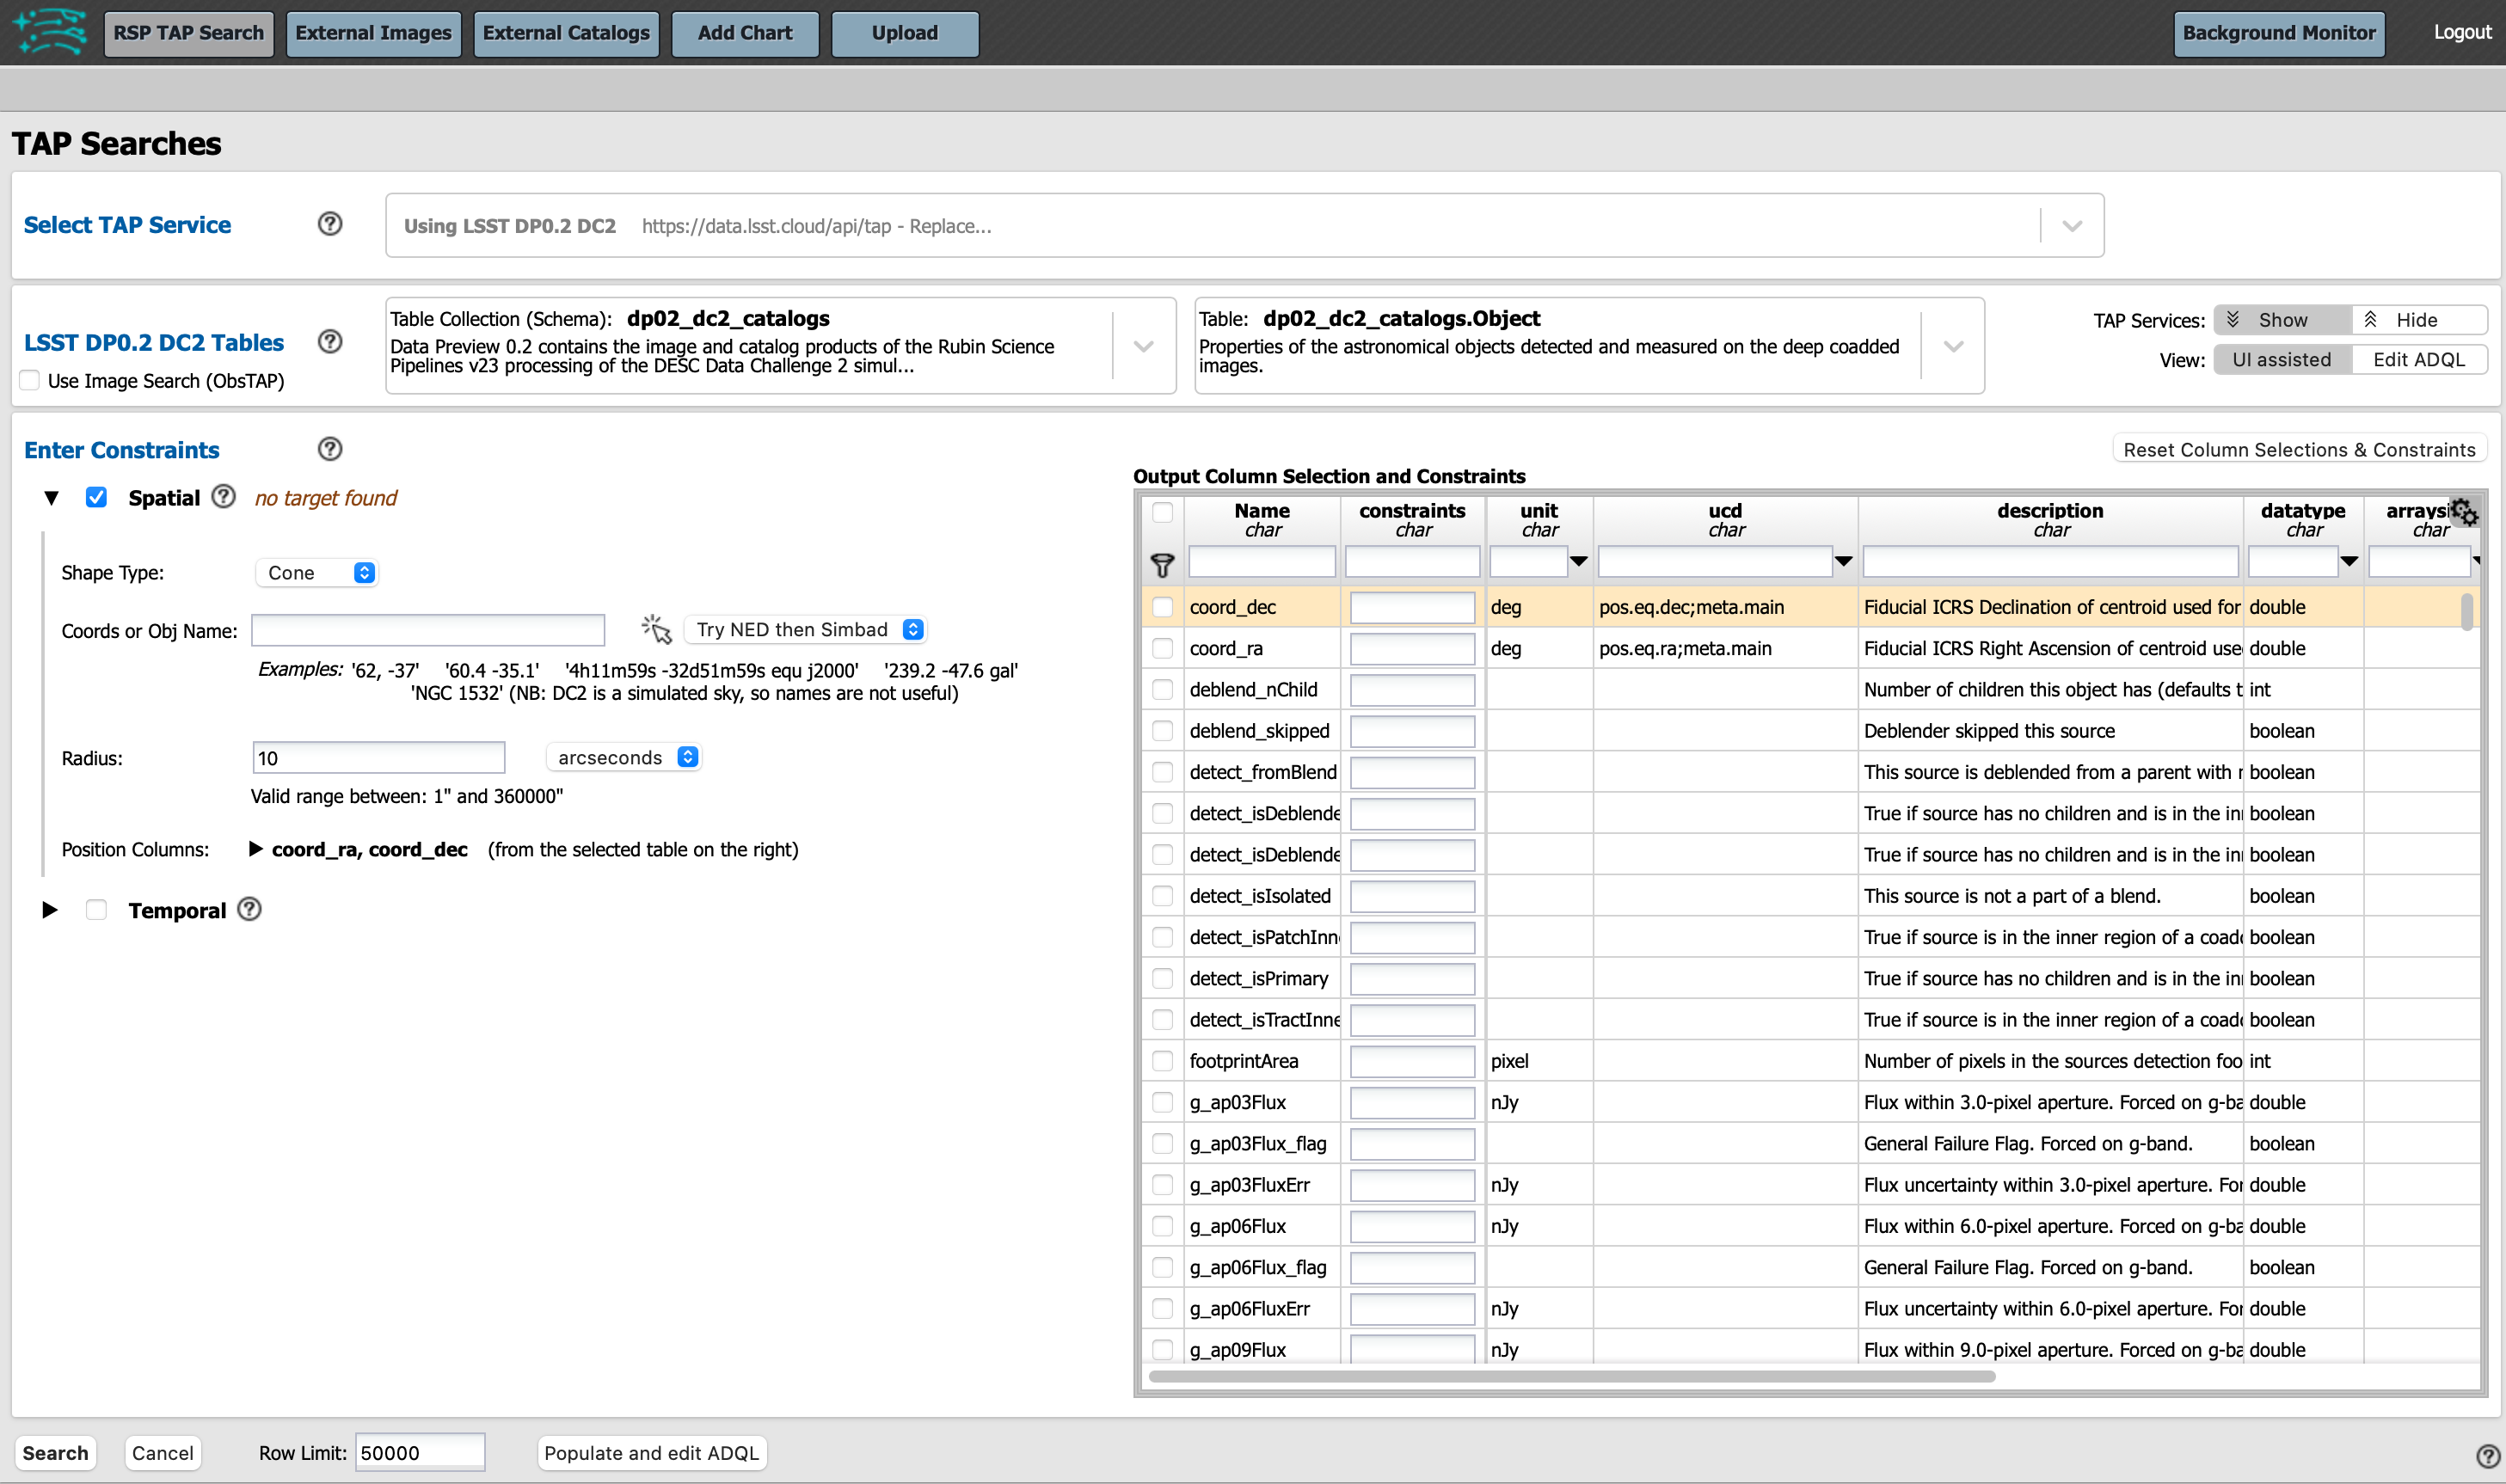 Screenshot of the default view of the rubin science platform portal interface for single table queries. From this window the user can select the type of search, tables to search, select various constraints, and can select the number of rows to return.